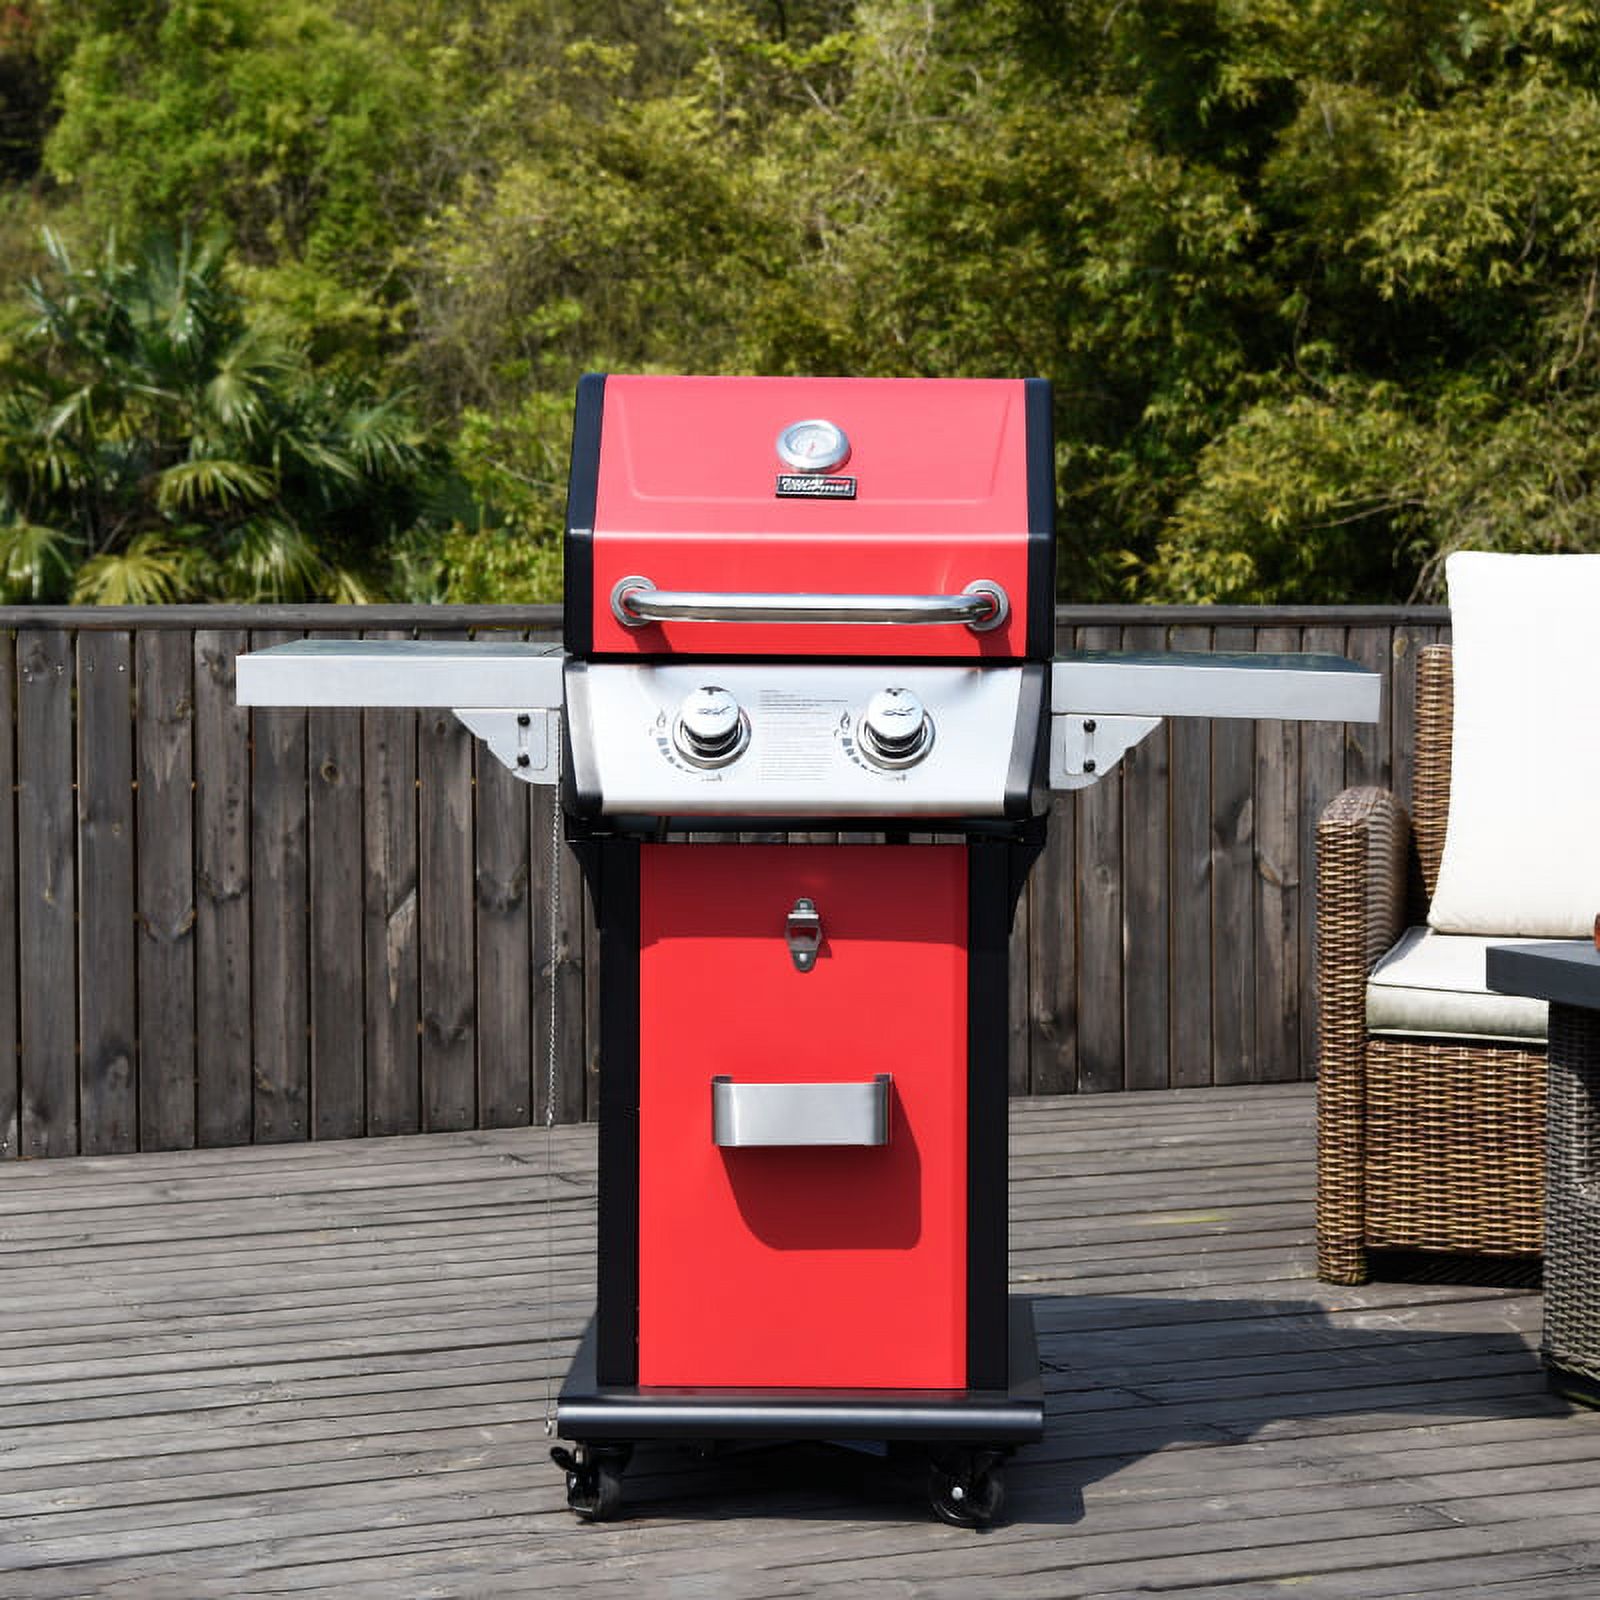 Royal Gourmet GG2004 2-BurnerGas Grill, for Patio Cooking Family Gatherings, Red - image 2 of 3